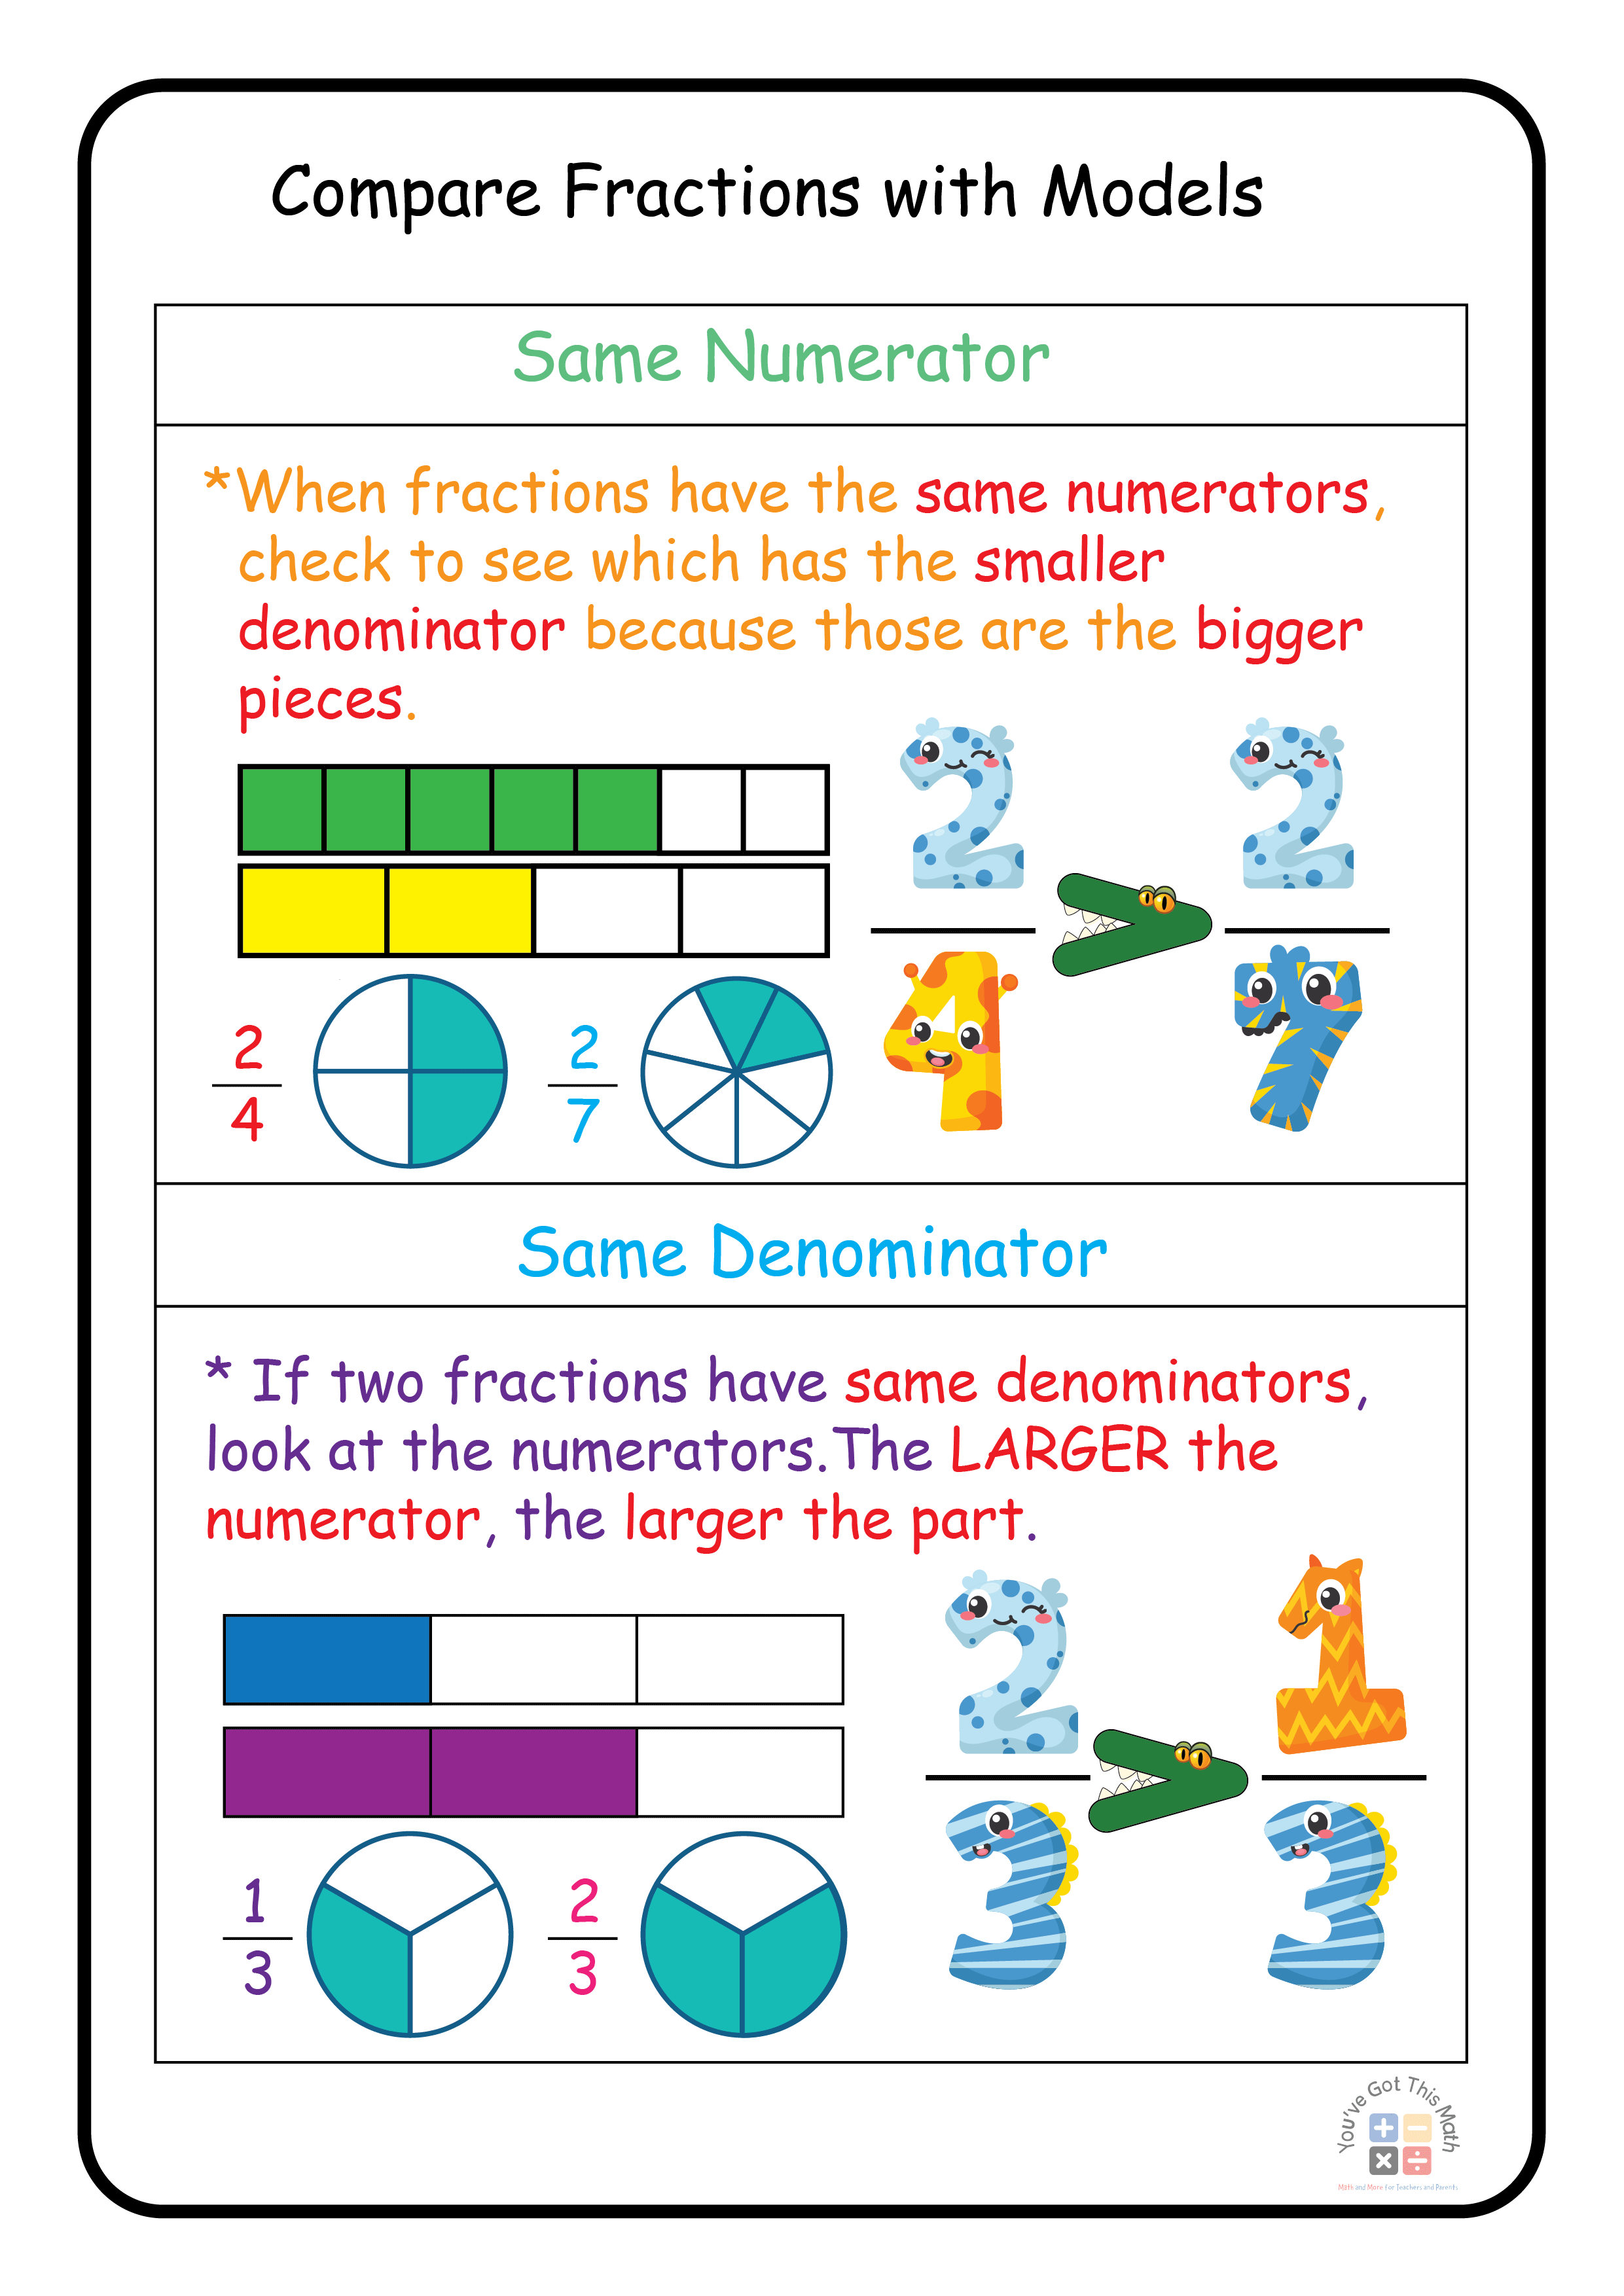 Compare Fractions with Models